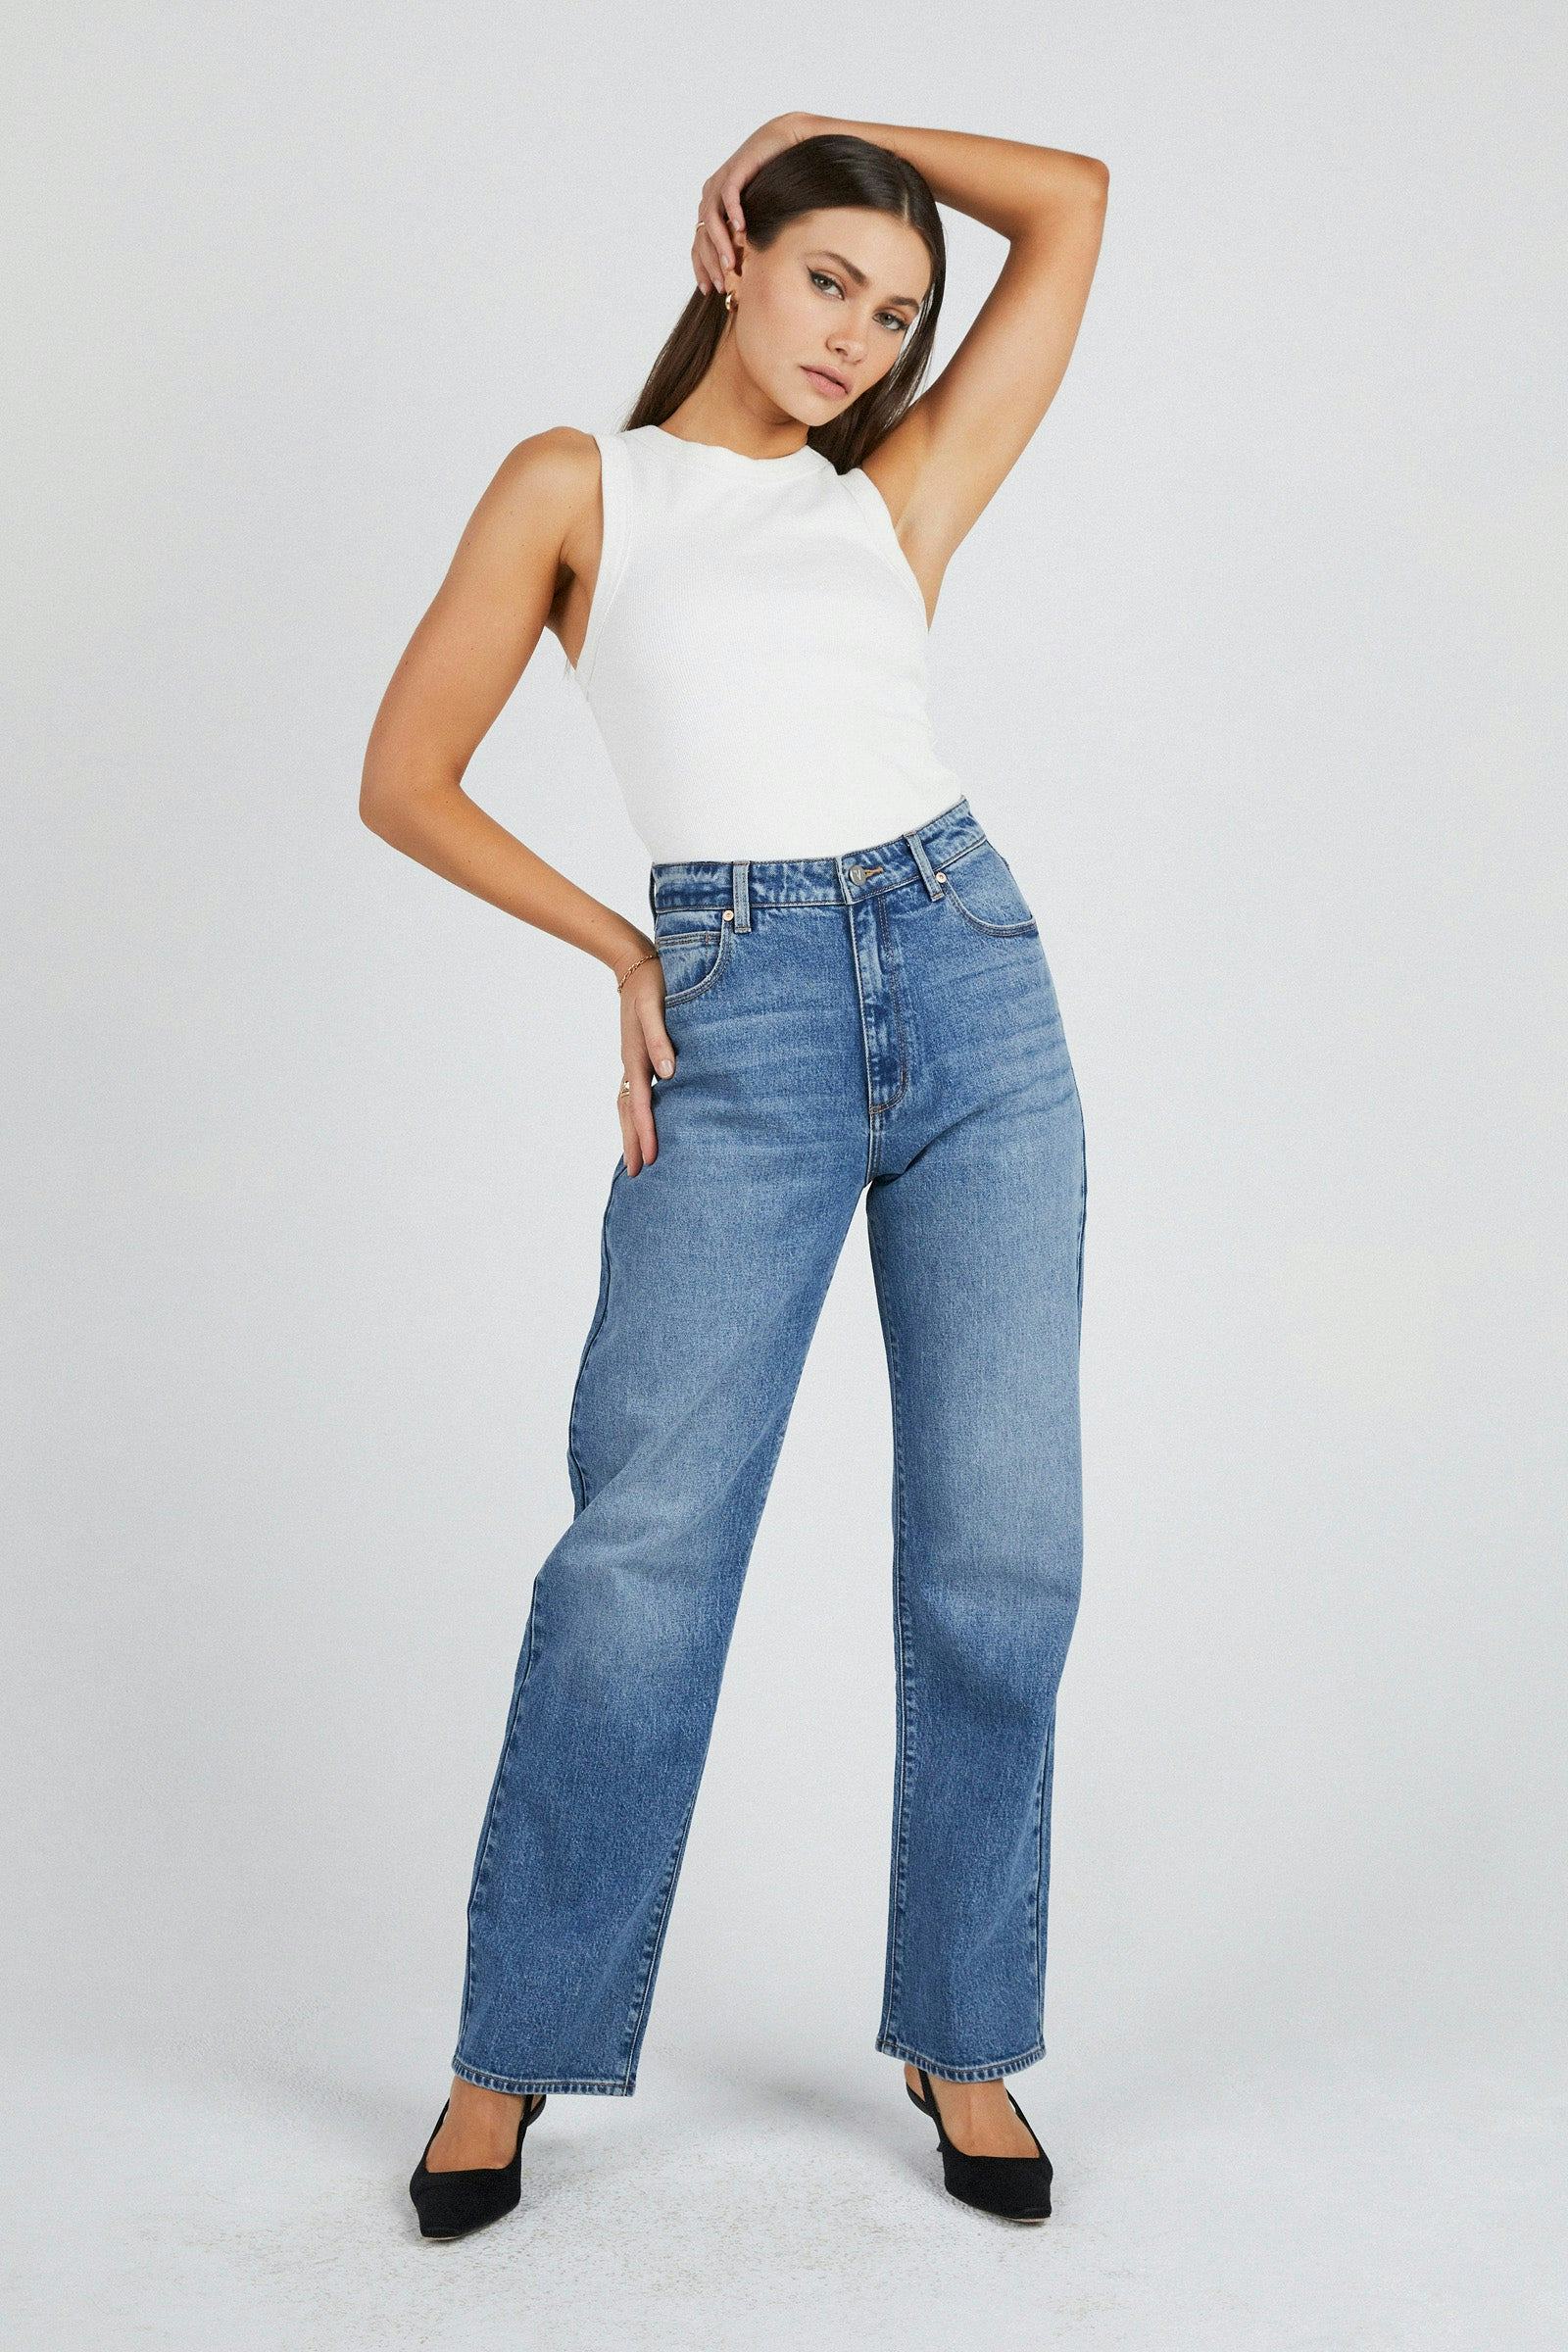 Denim Jeans For Women | Women's Jeans United States | Abrand US